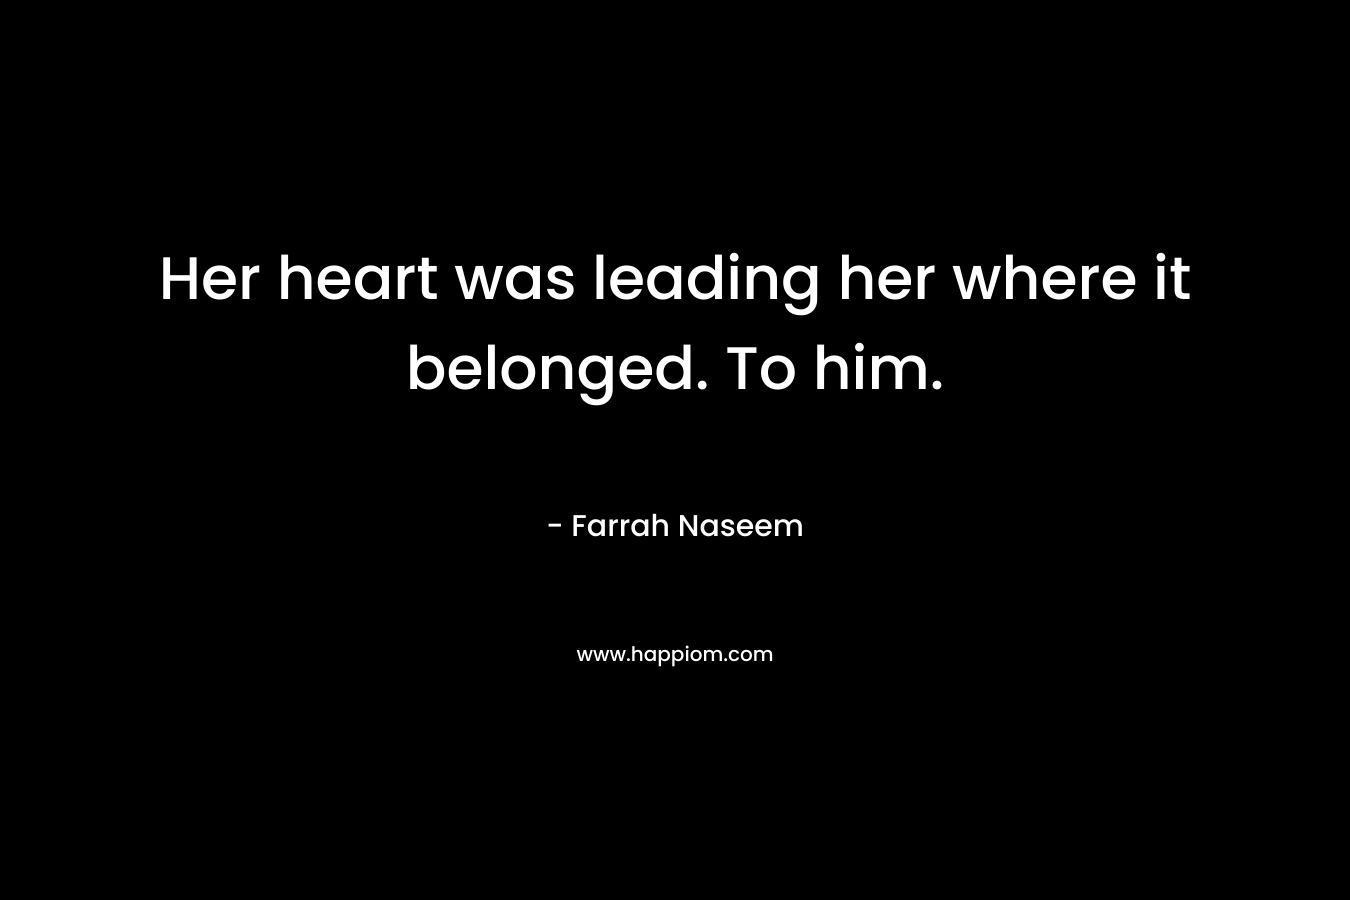 Her heart was leading her where it belonged. To him.